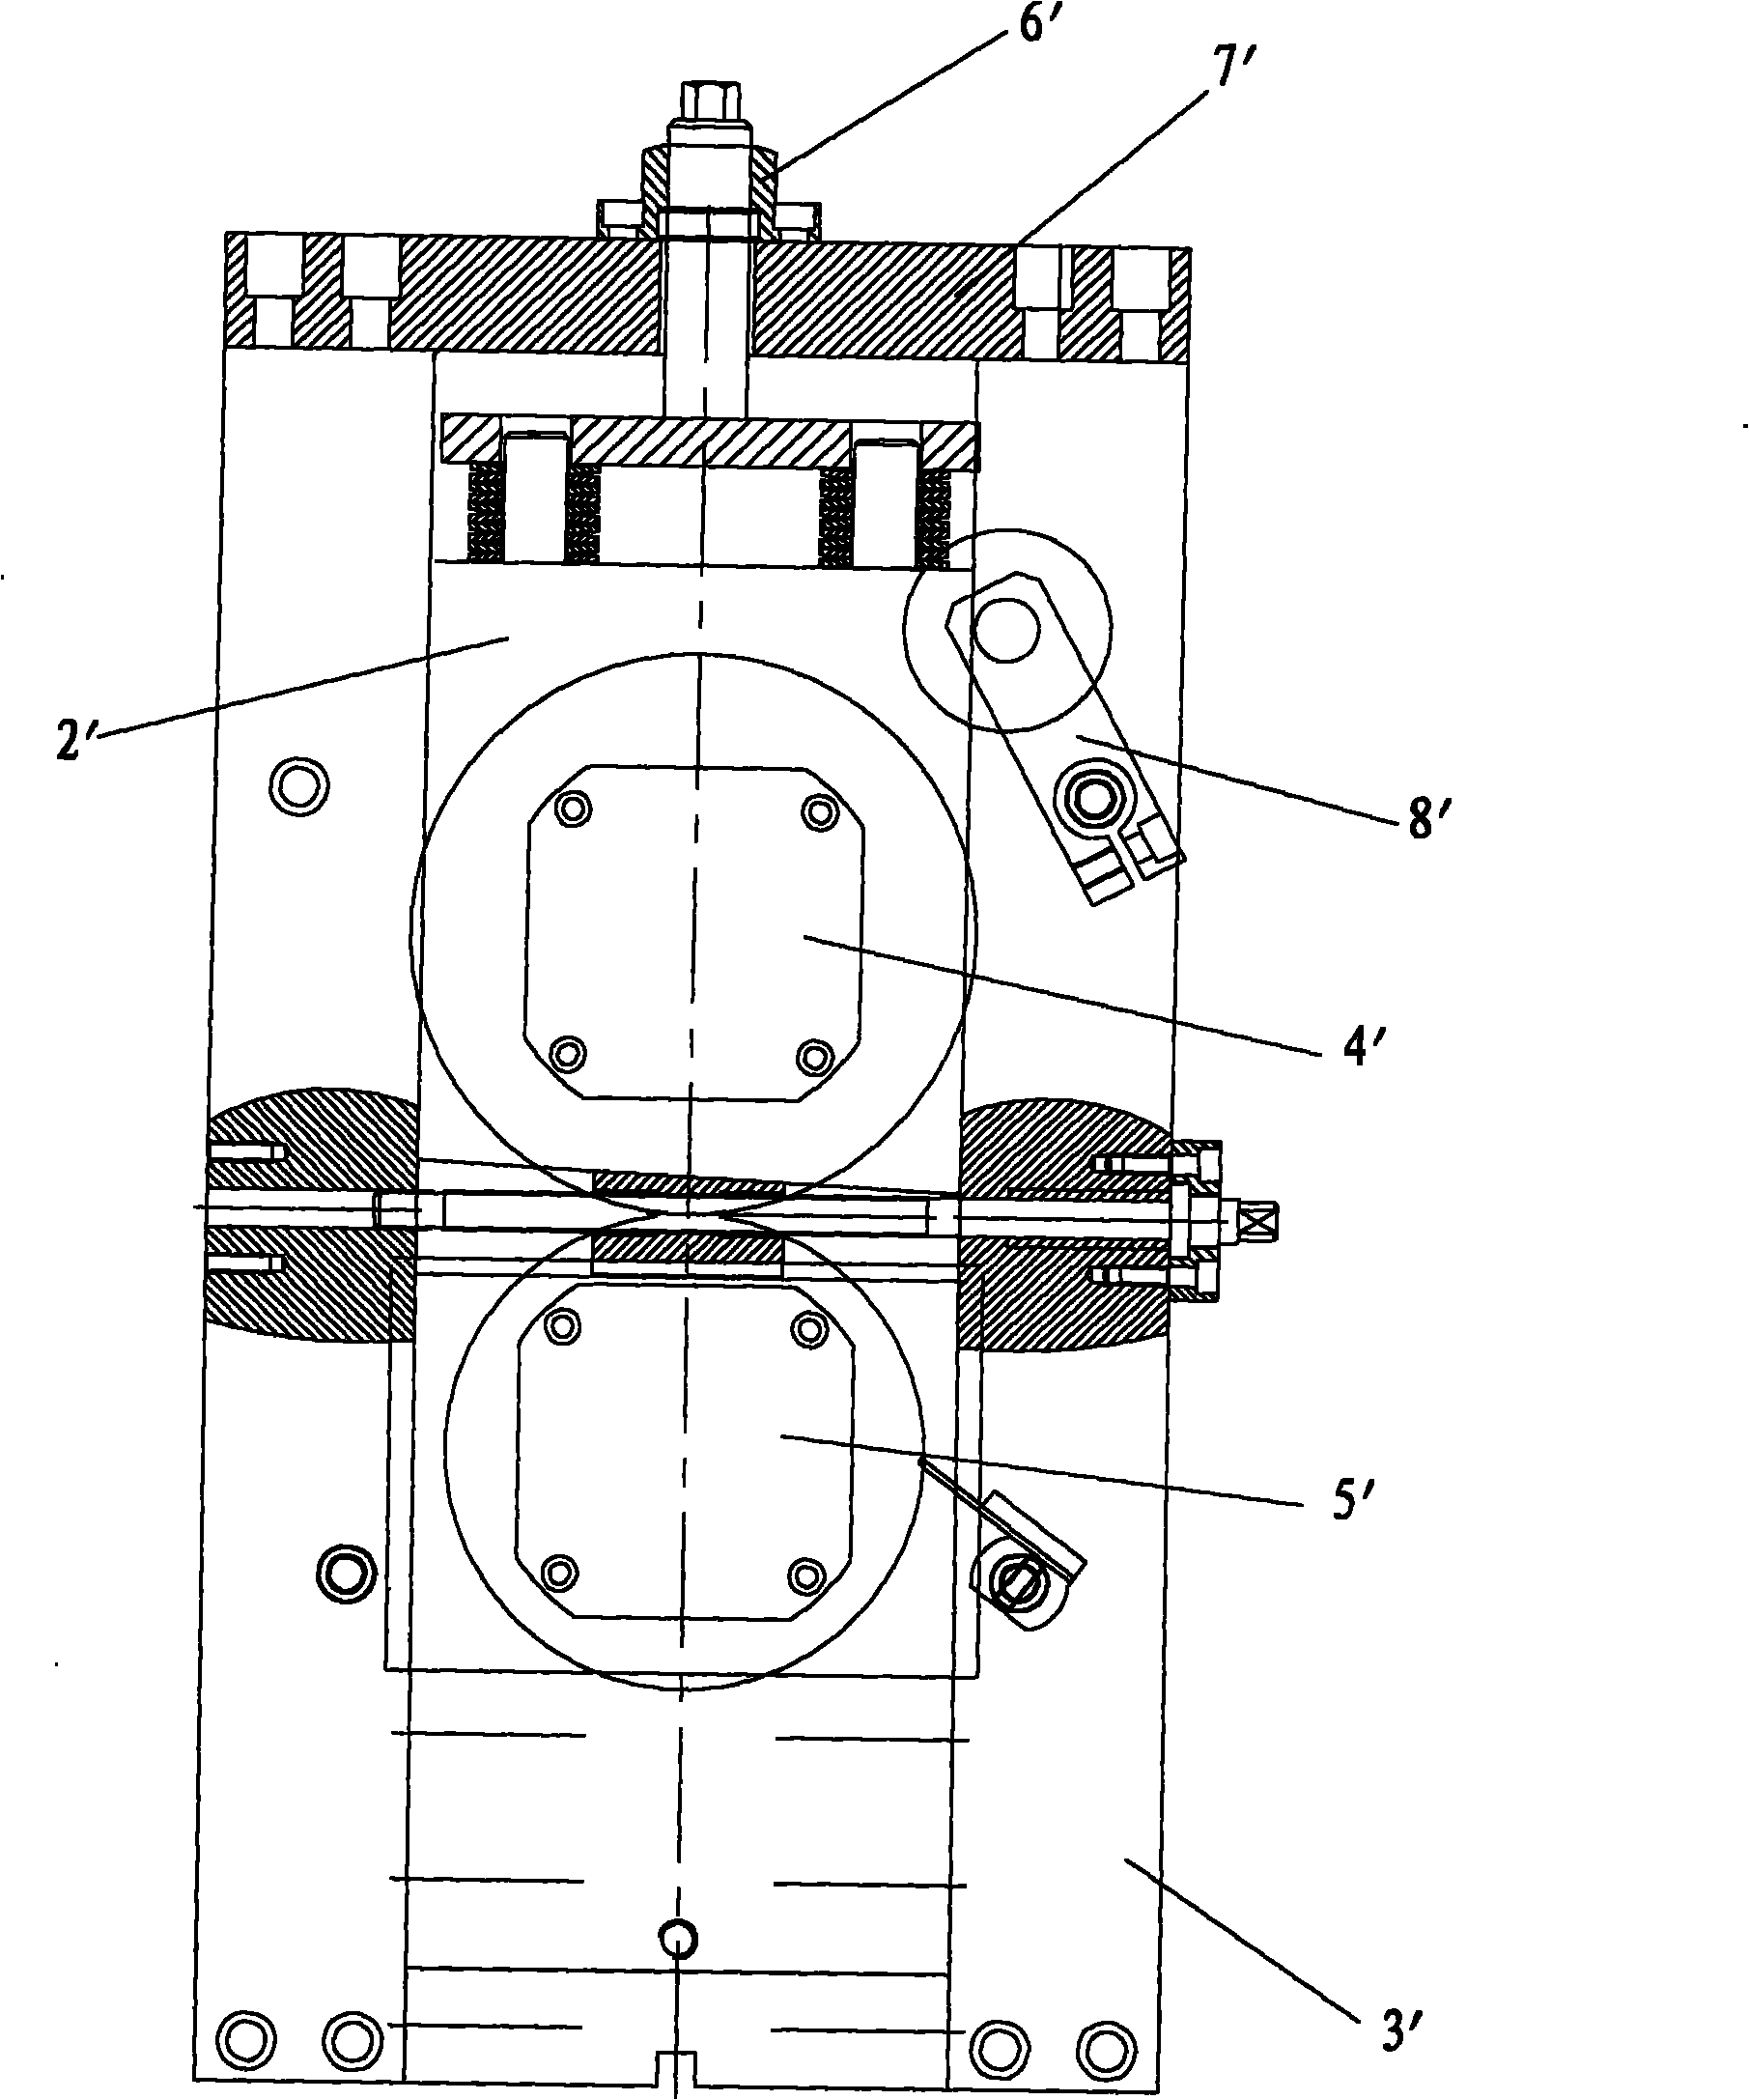 Rotating die cutting device